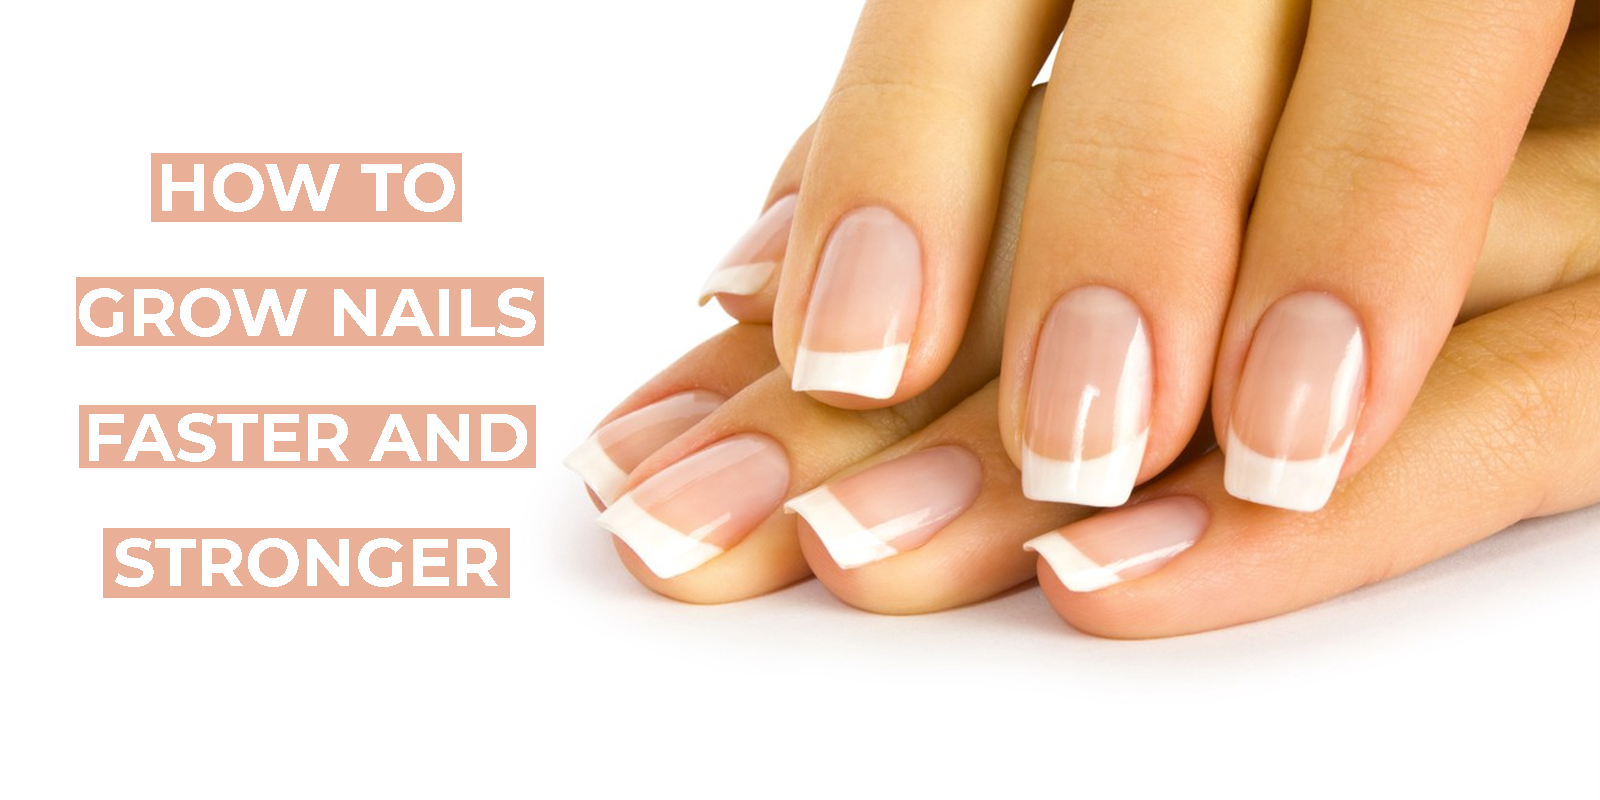 Why do my nails not grow long? - Quora